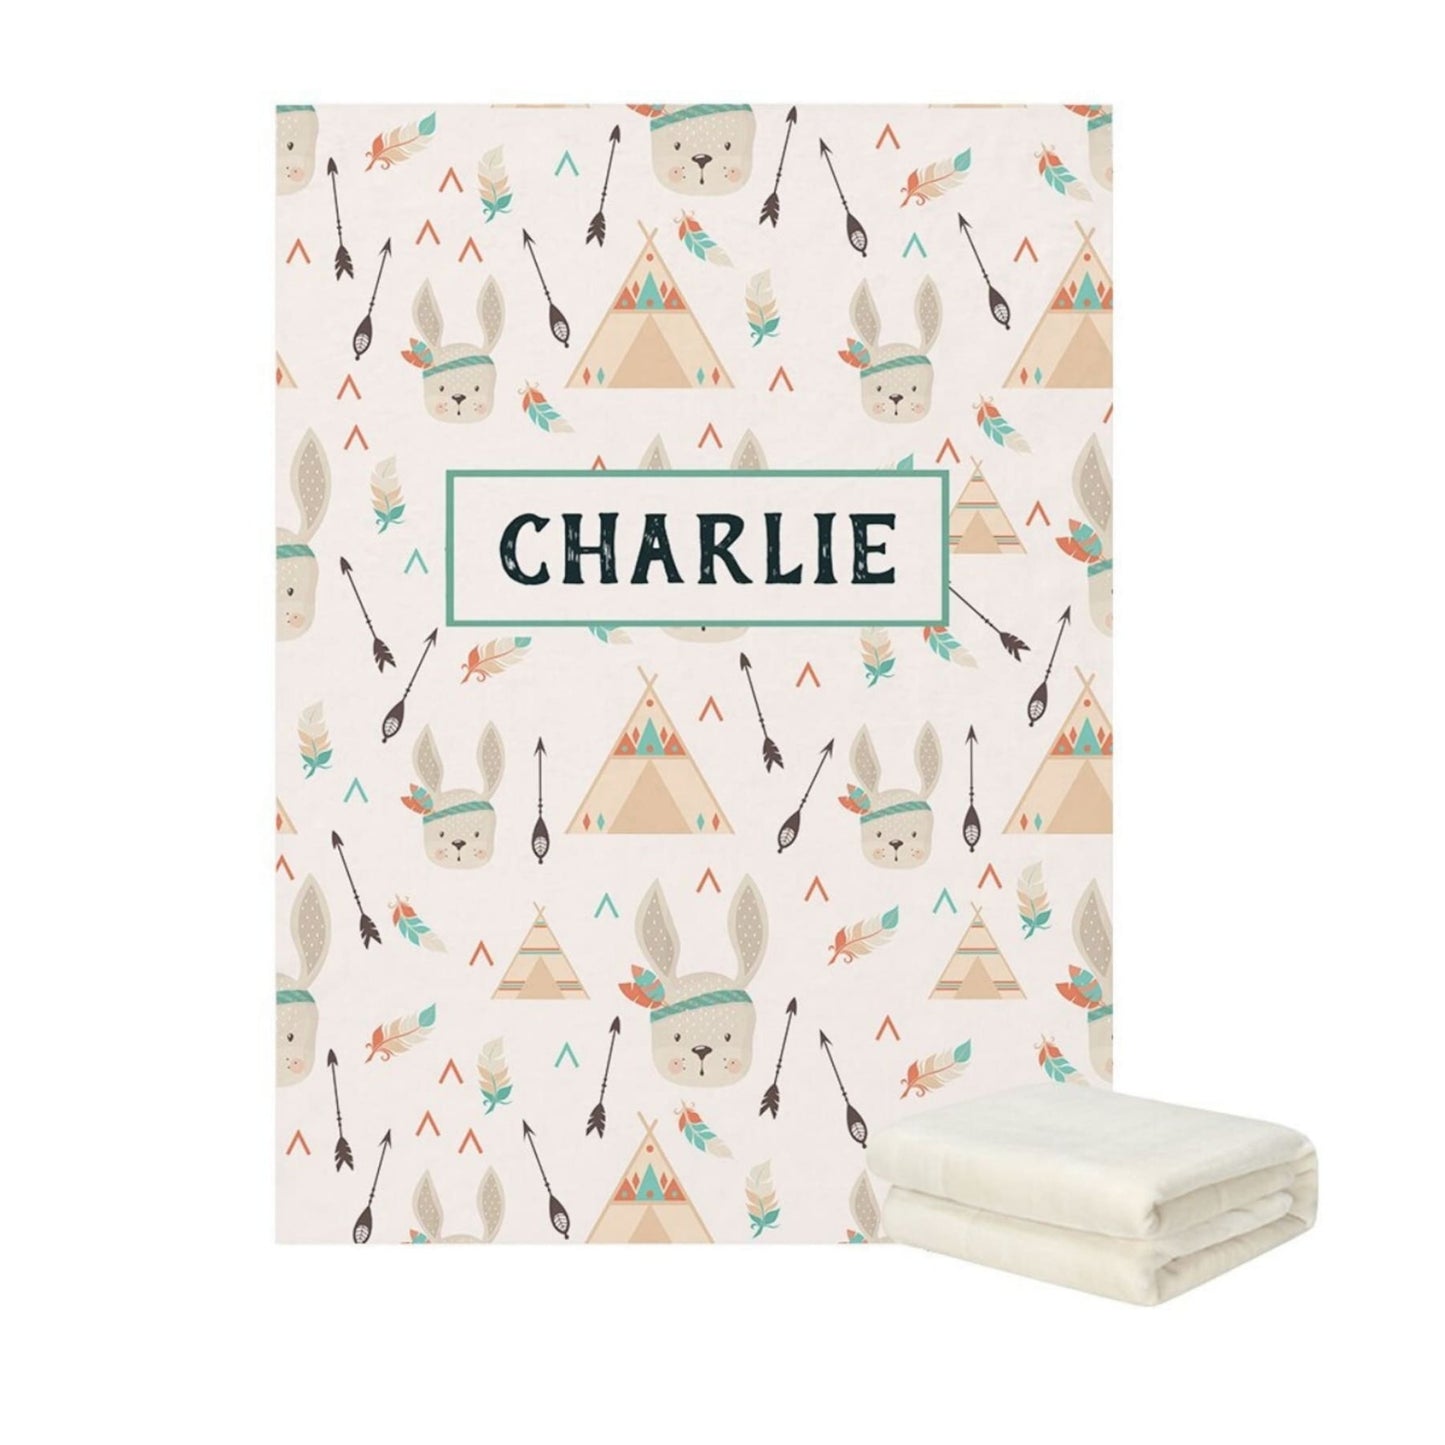 Rabbit themed Personalized Baby Fleece Blankets with baby's name Charlie